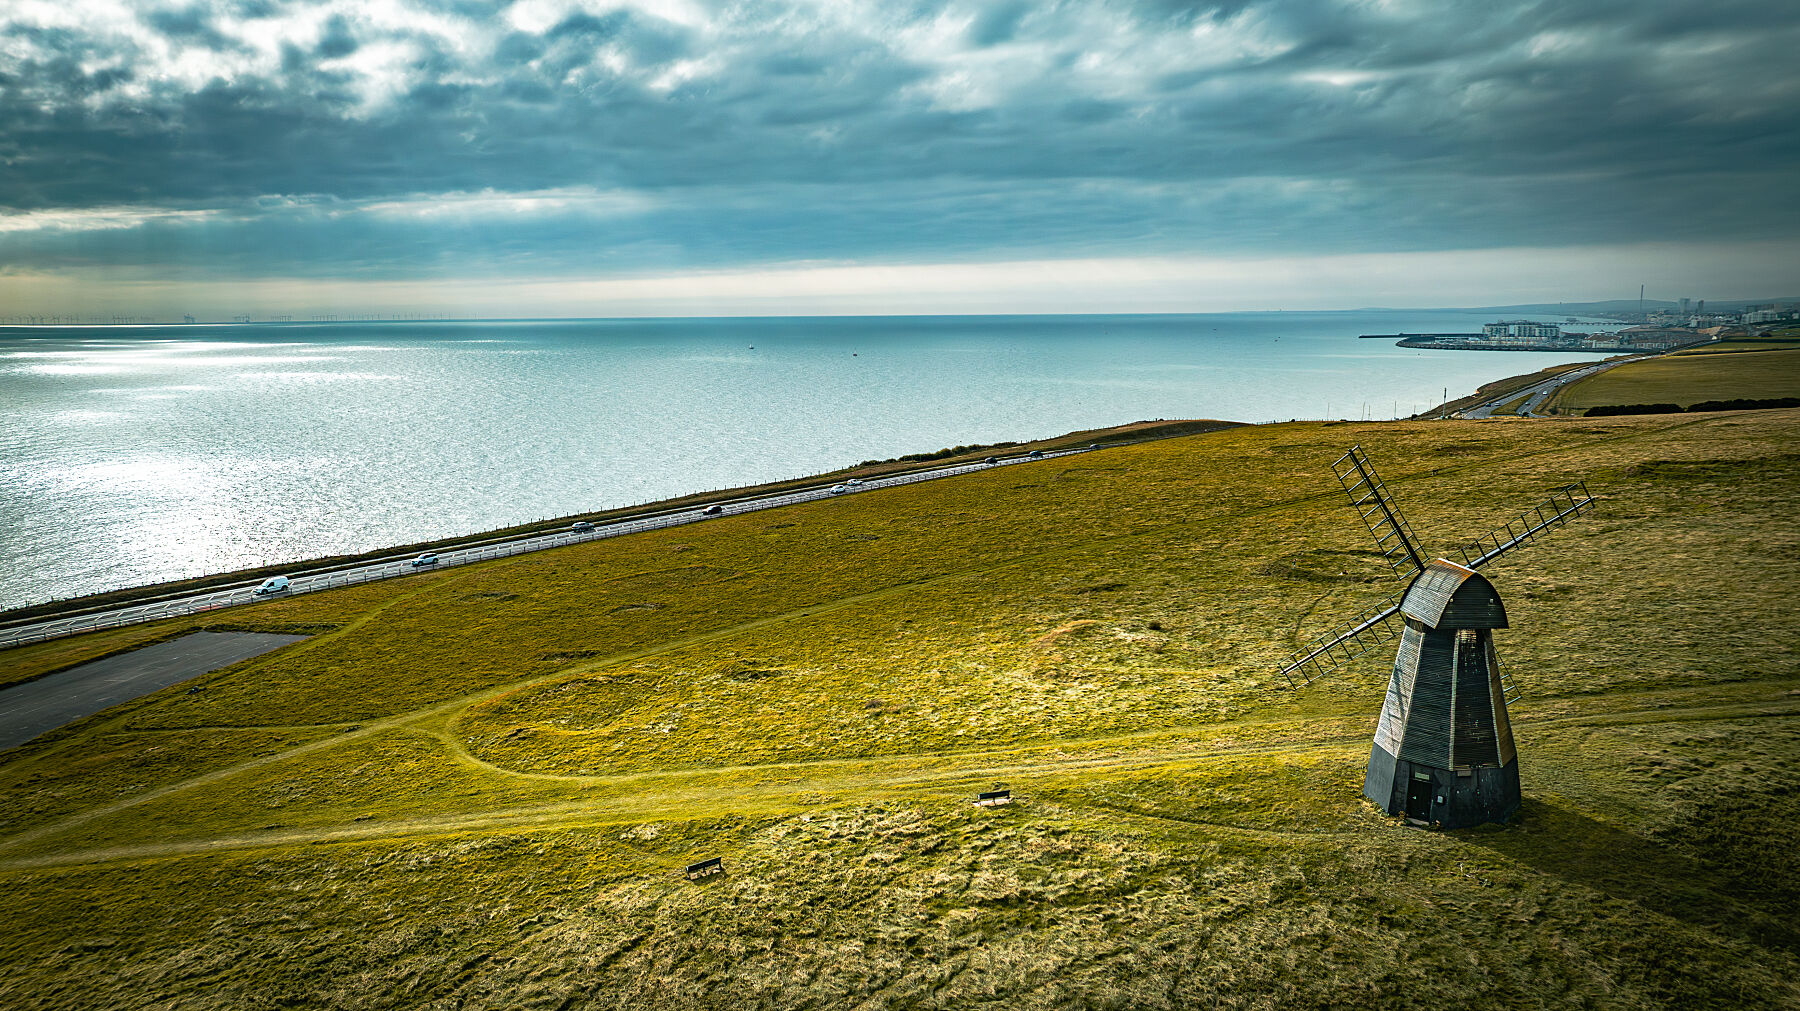 Lonely windmill on shores of England. Rottingdean, Brighton. Print or framed photography art.